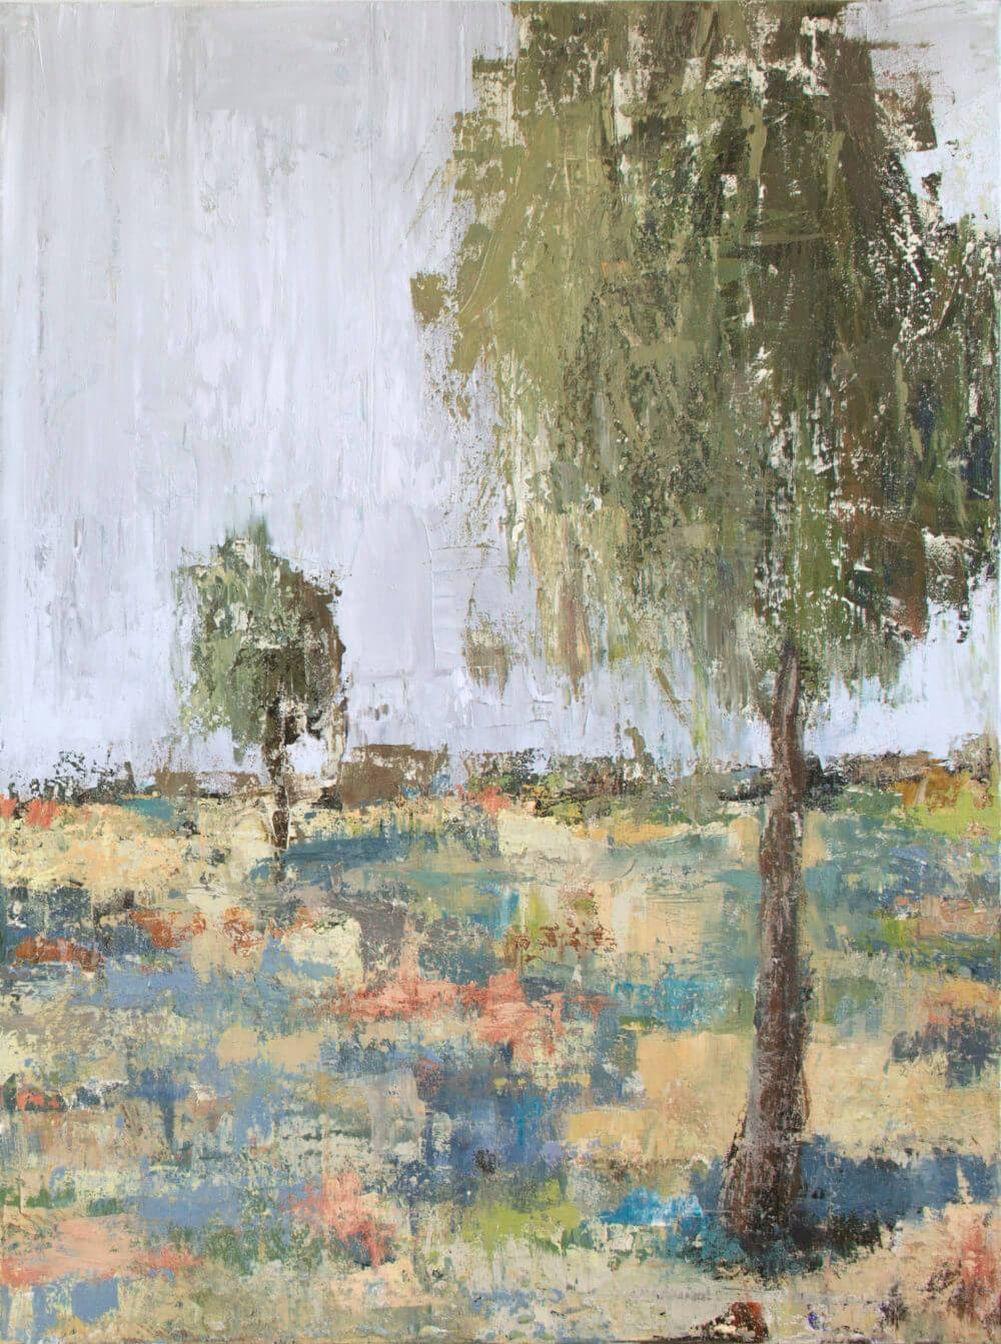 John Beard Abstract Painting - SPRING DAY II, Contemporary Landscape Fine Art on Giclee Canvas: 60"H x 40"W